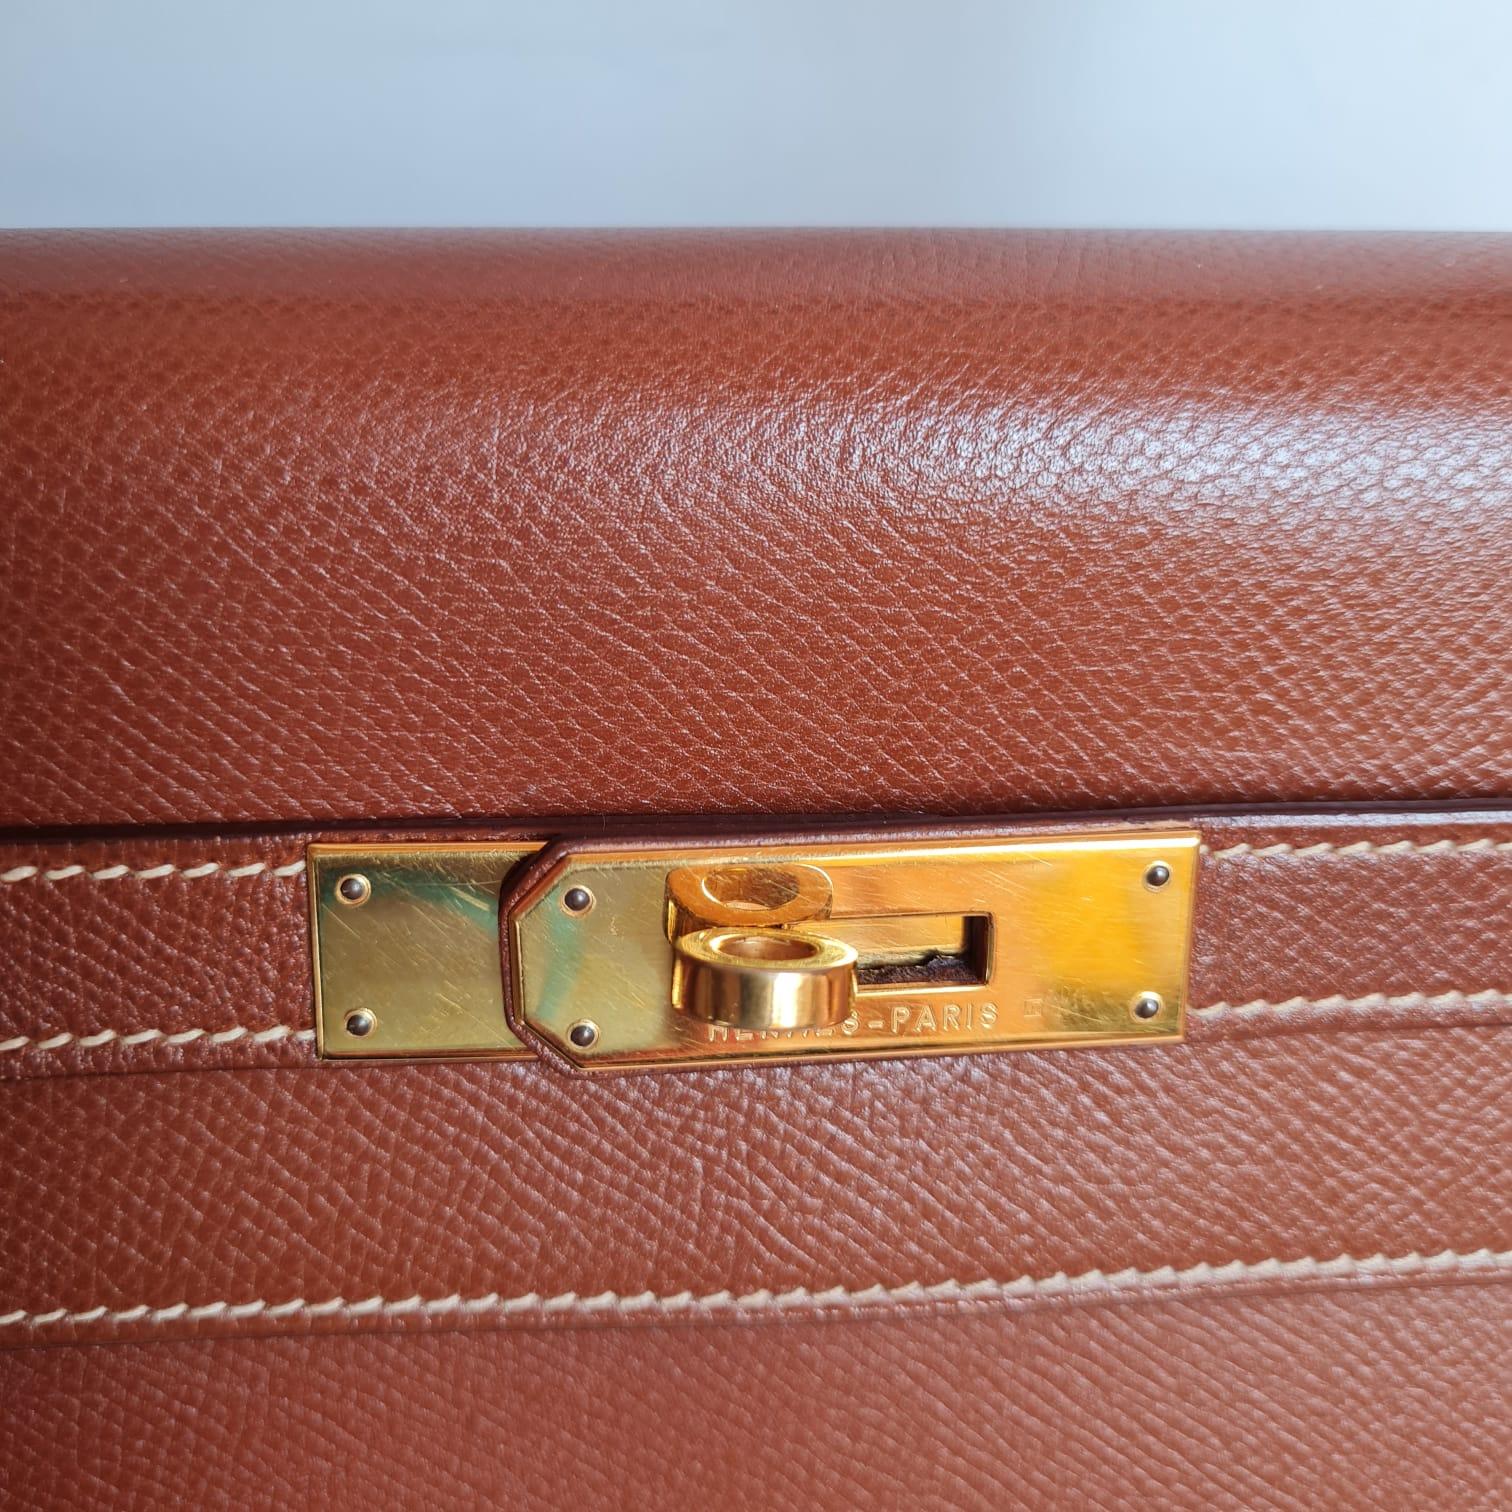 Beautiful and rare hermes kelly 35 in noisette lisse leather. Overall in great condition, with minor scuffing on the corners. Very slight slouching on the side of the bag body. Lisse leather looks a little like epsom, but 2003 is the last year this